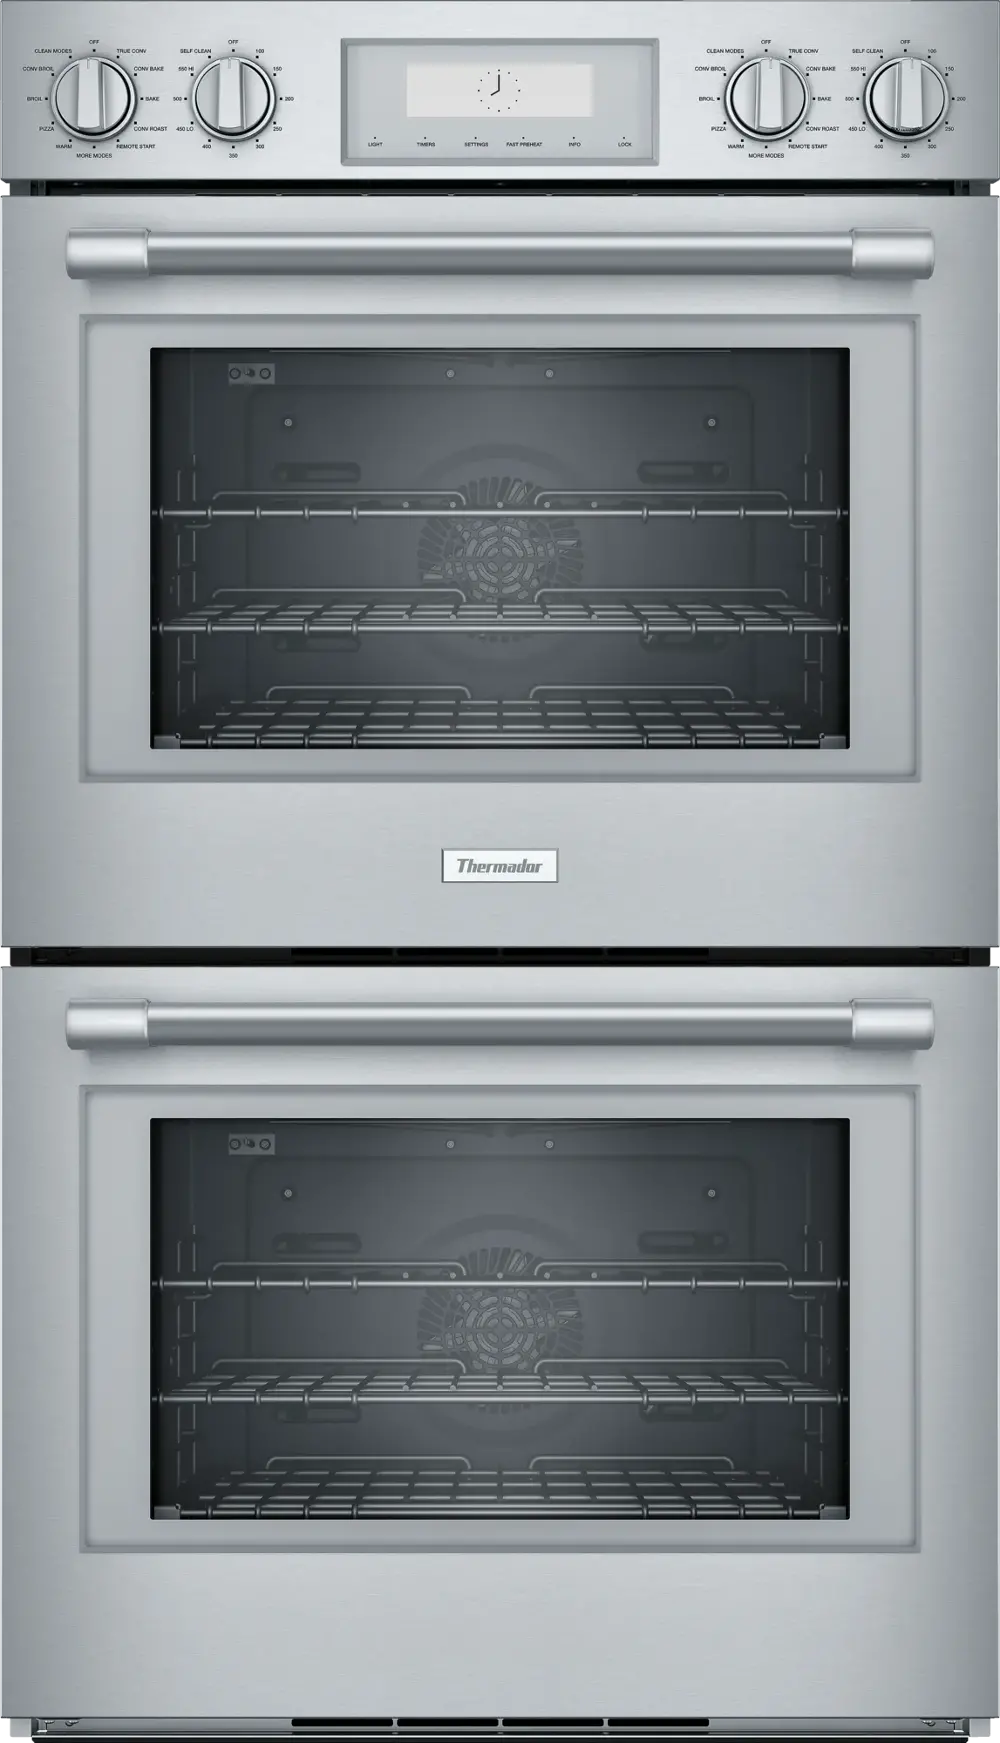 PO302W Thermador 9.2 cu ft Double Wall Oven - Stainless Steel 30 Inch-1